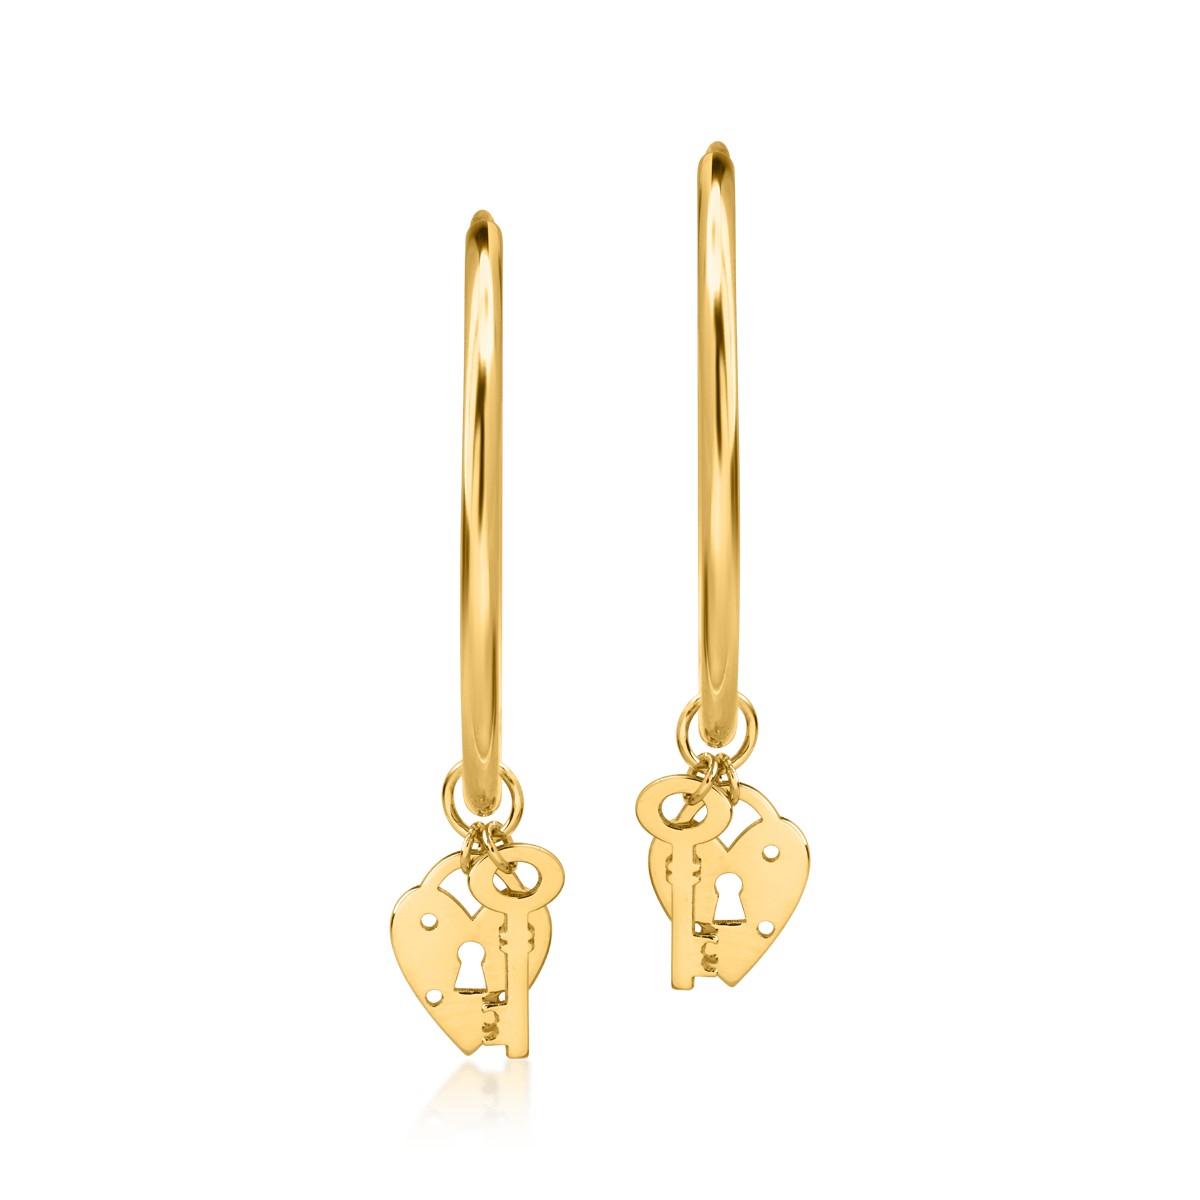 14K yellow gold hoop earrings with charms